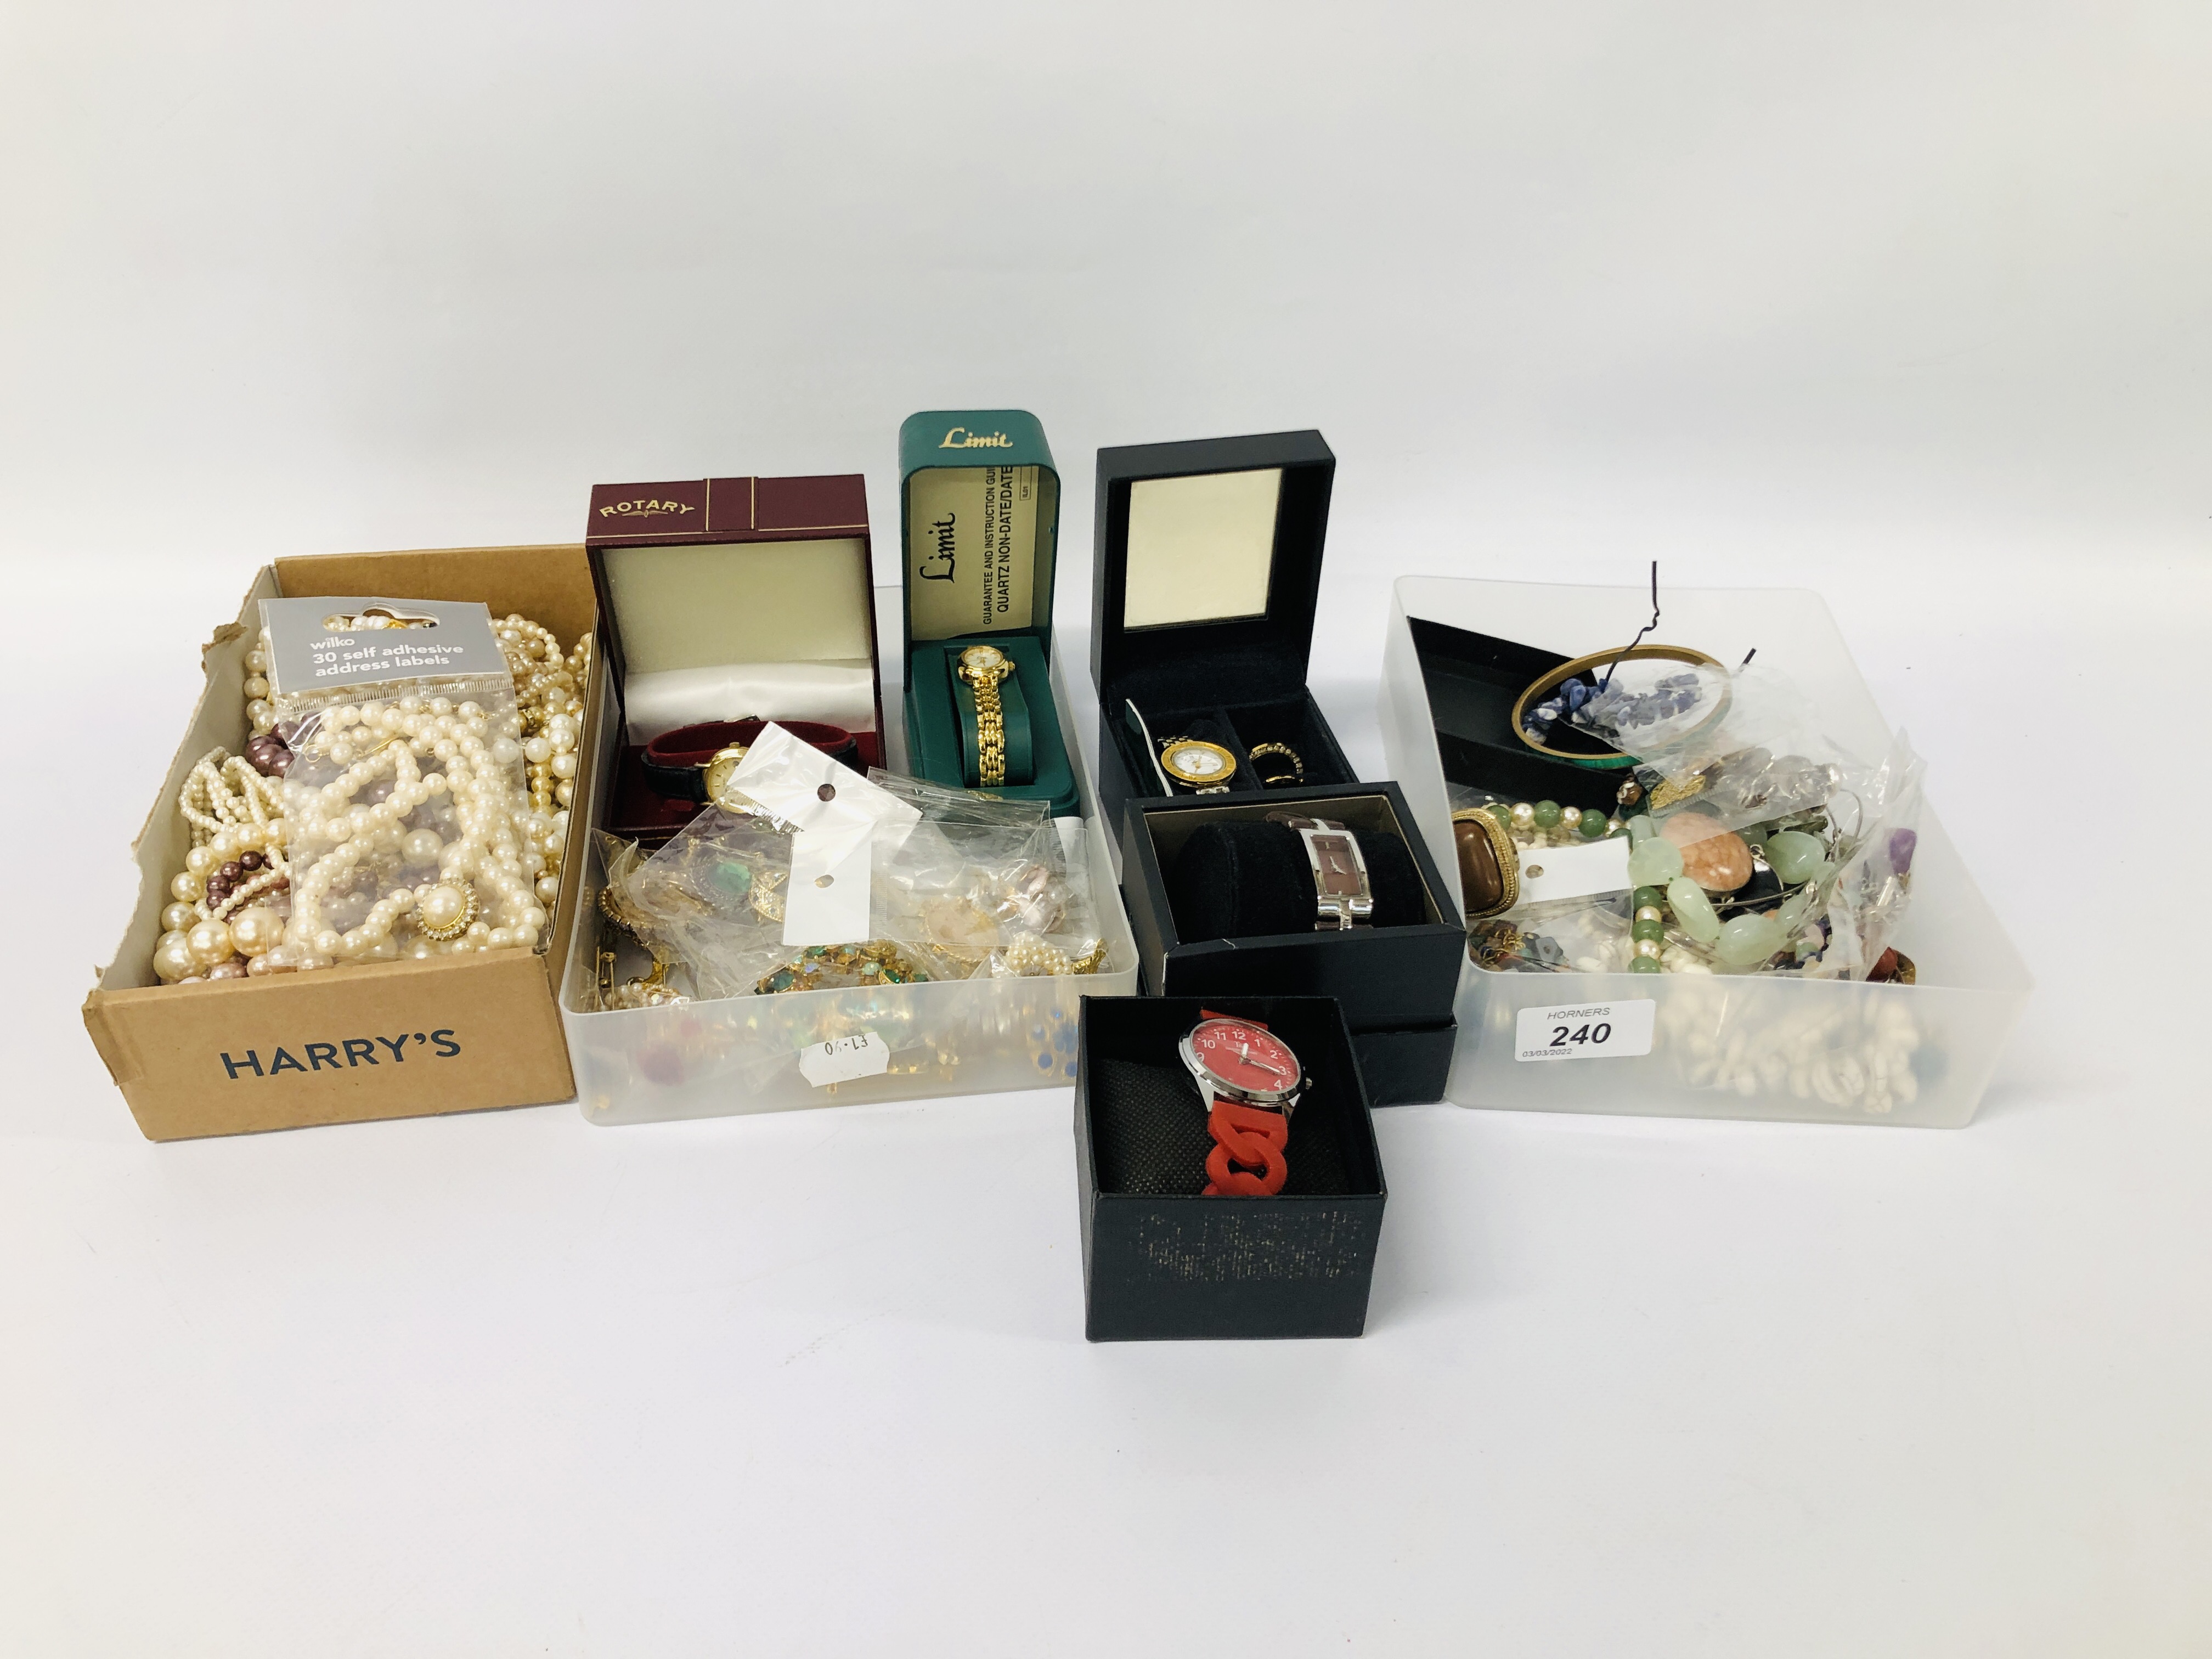 QUANTITY OF ASSORTED VINTAGE JEWELLERY TO INCLUDE BROOCHES, FAUX PEARLS AND BEADED NECKLACES,